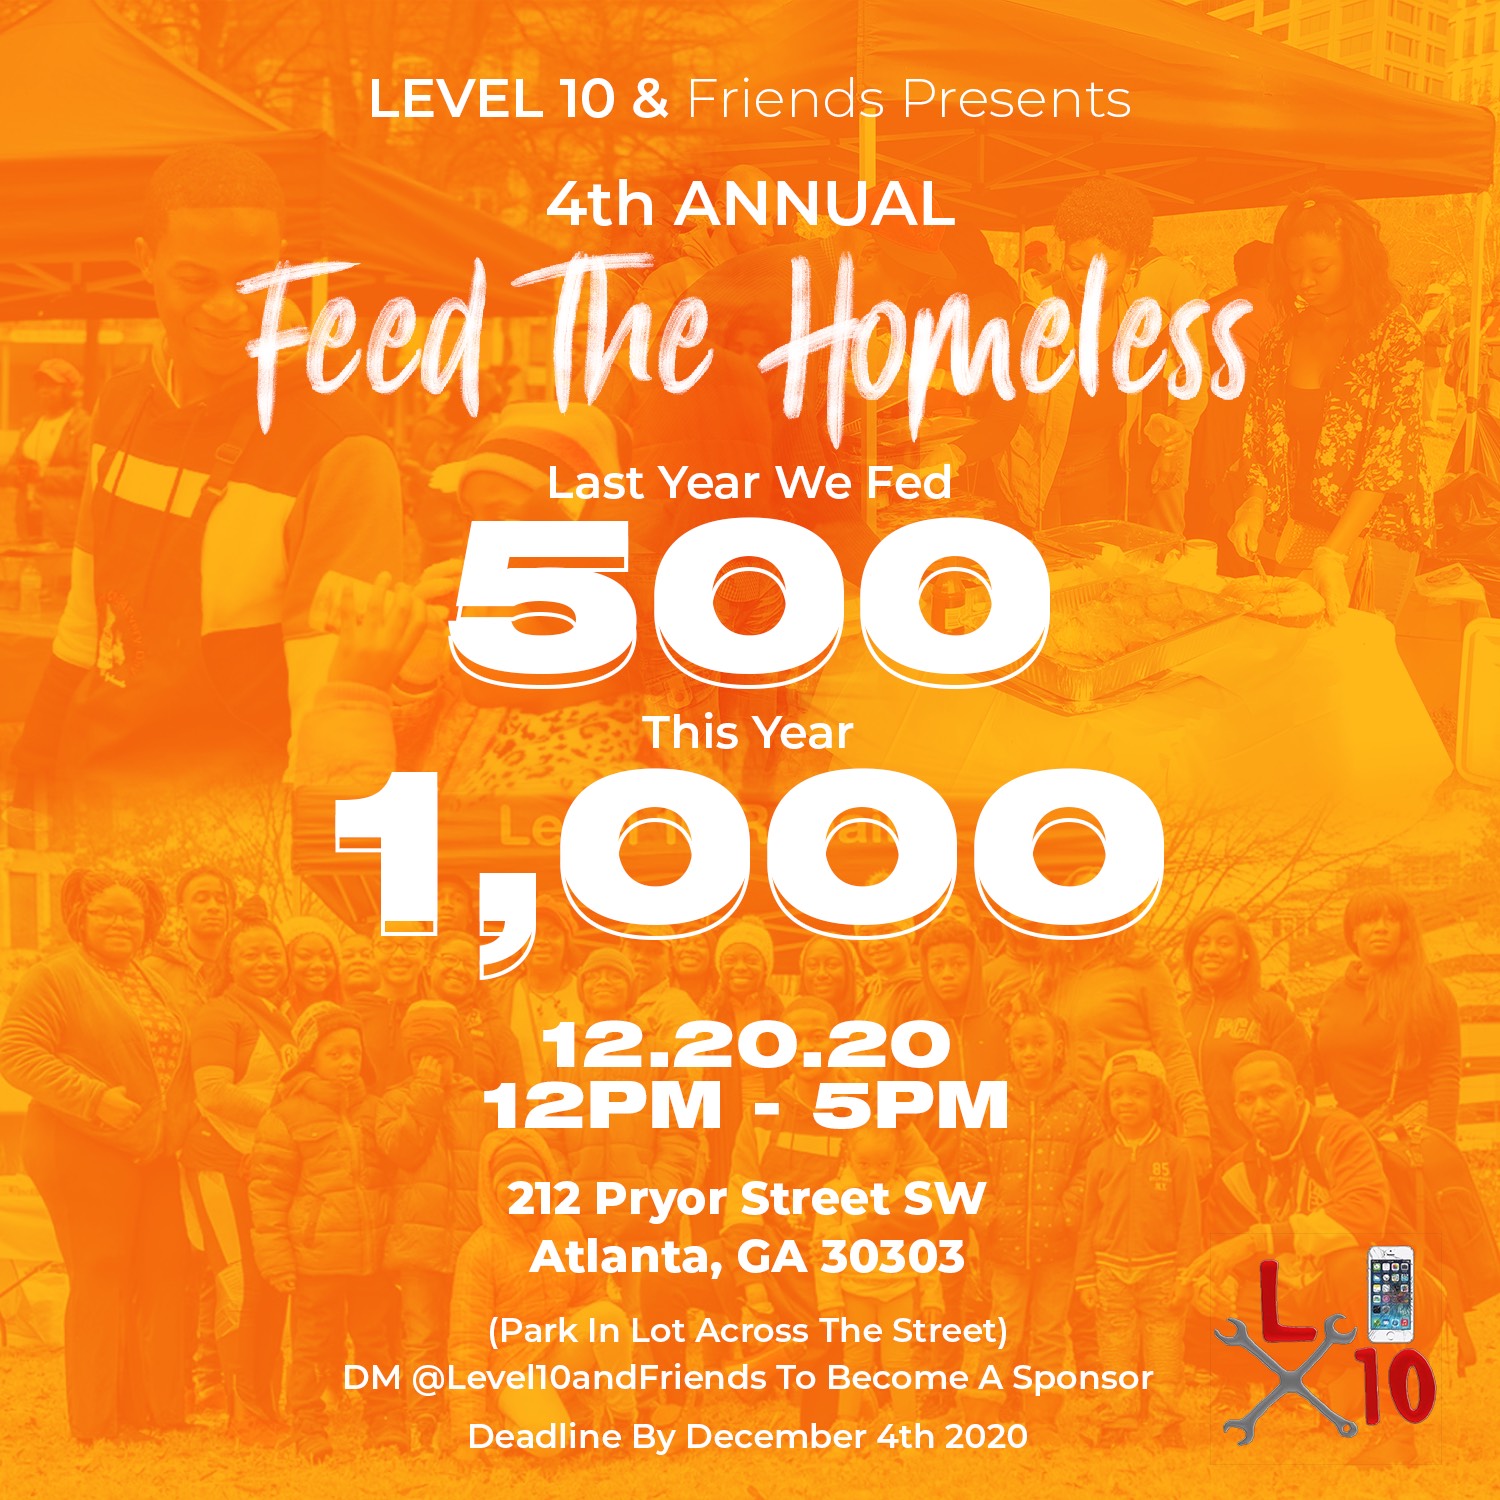 AJ Dewberry Hosts 4th Annual Feed the Homeless Event in Atlanta